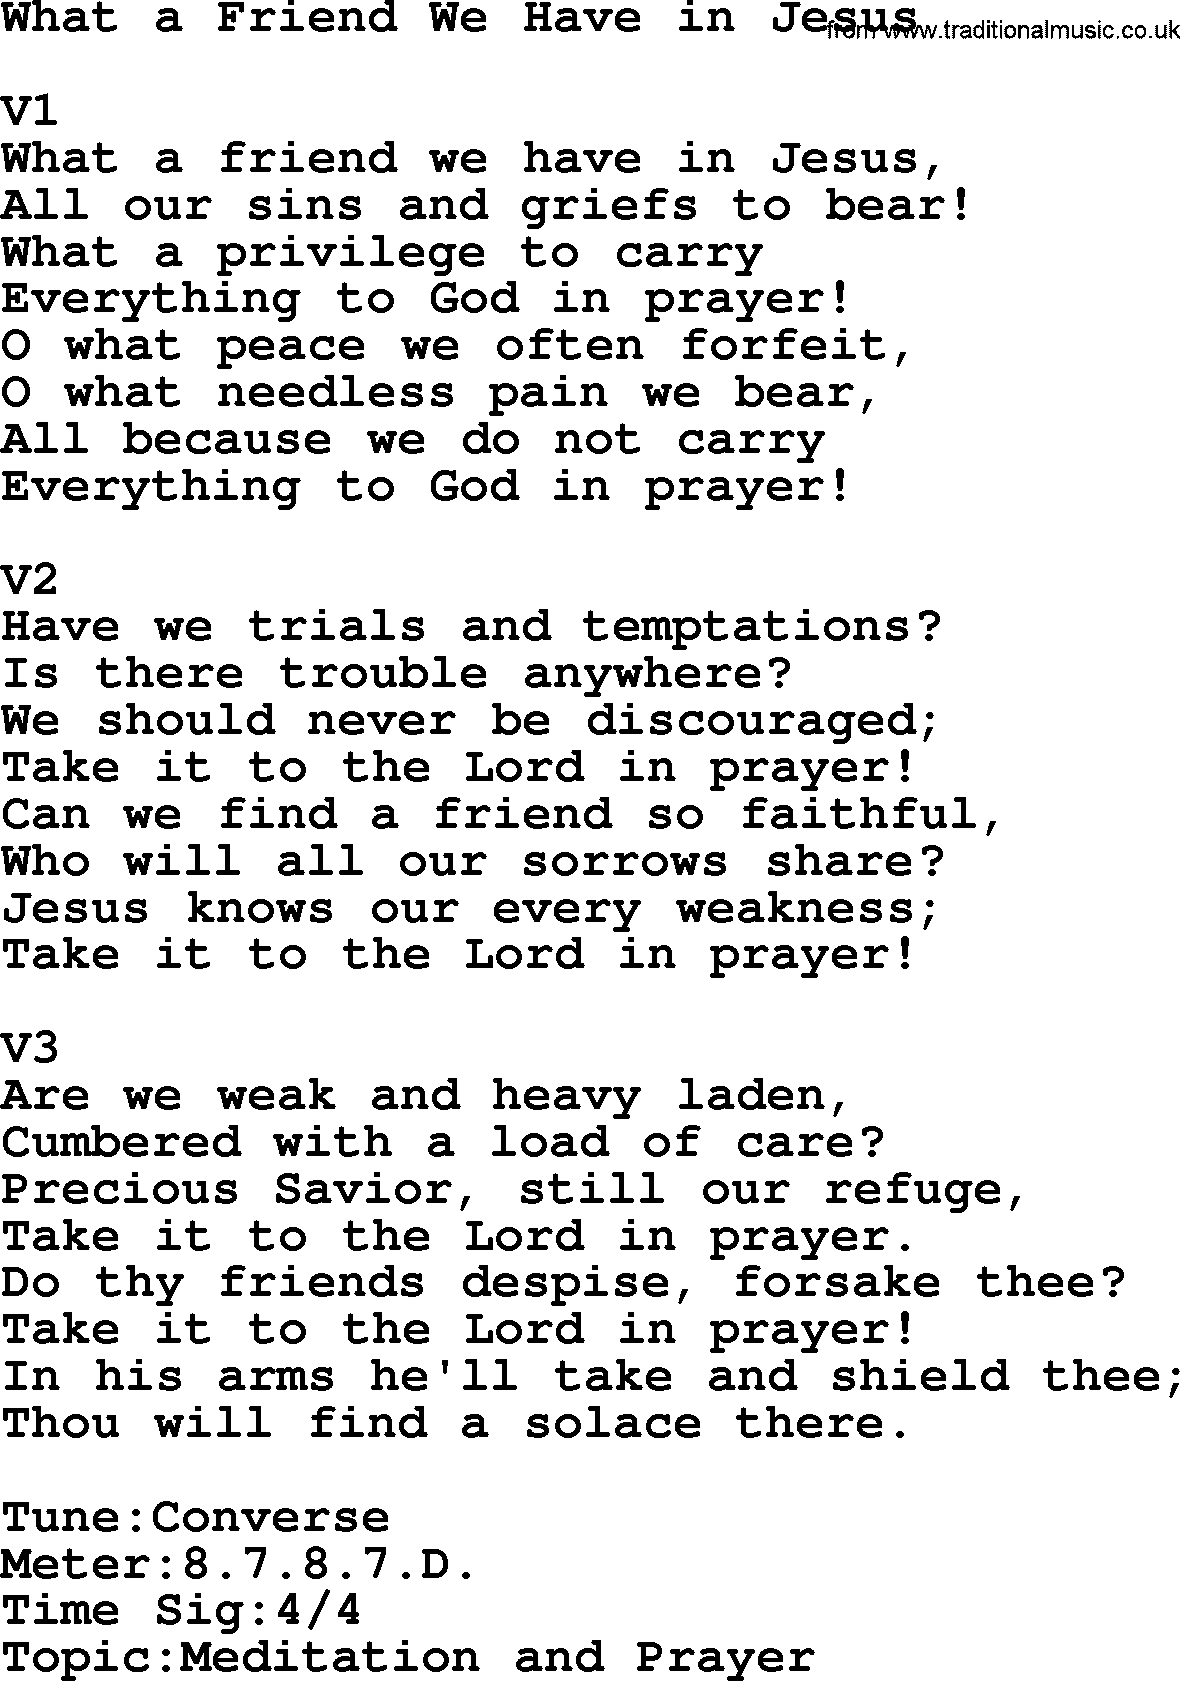 Adventist Hynms collection, Hymn: What A Friend We Have In Jesus, lyrics with PDF